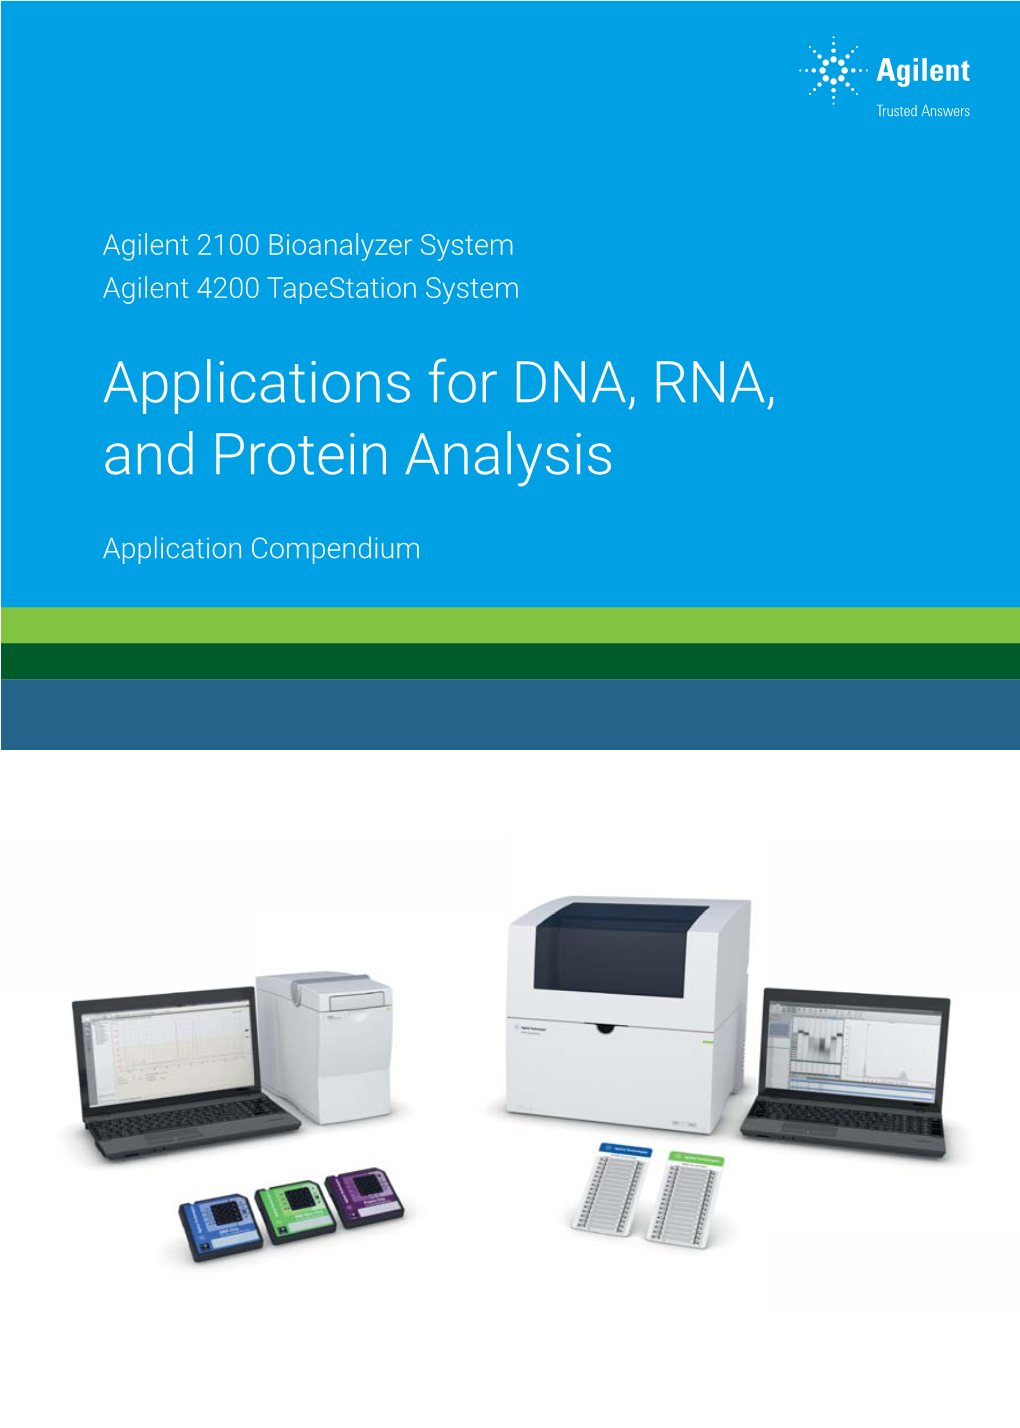 Applications for DNA, RNA, and Protein Analysis